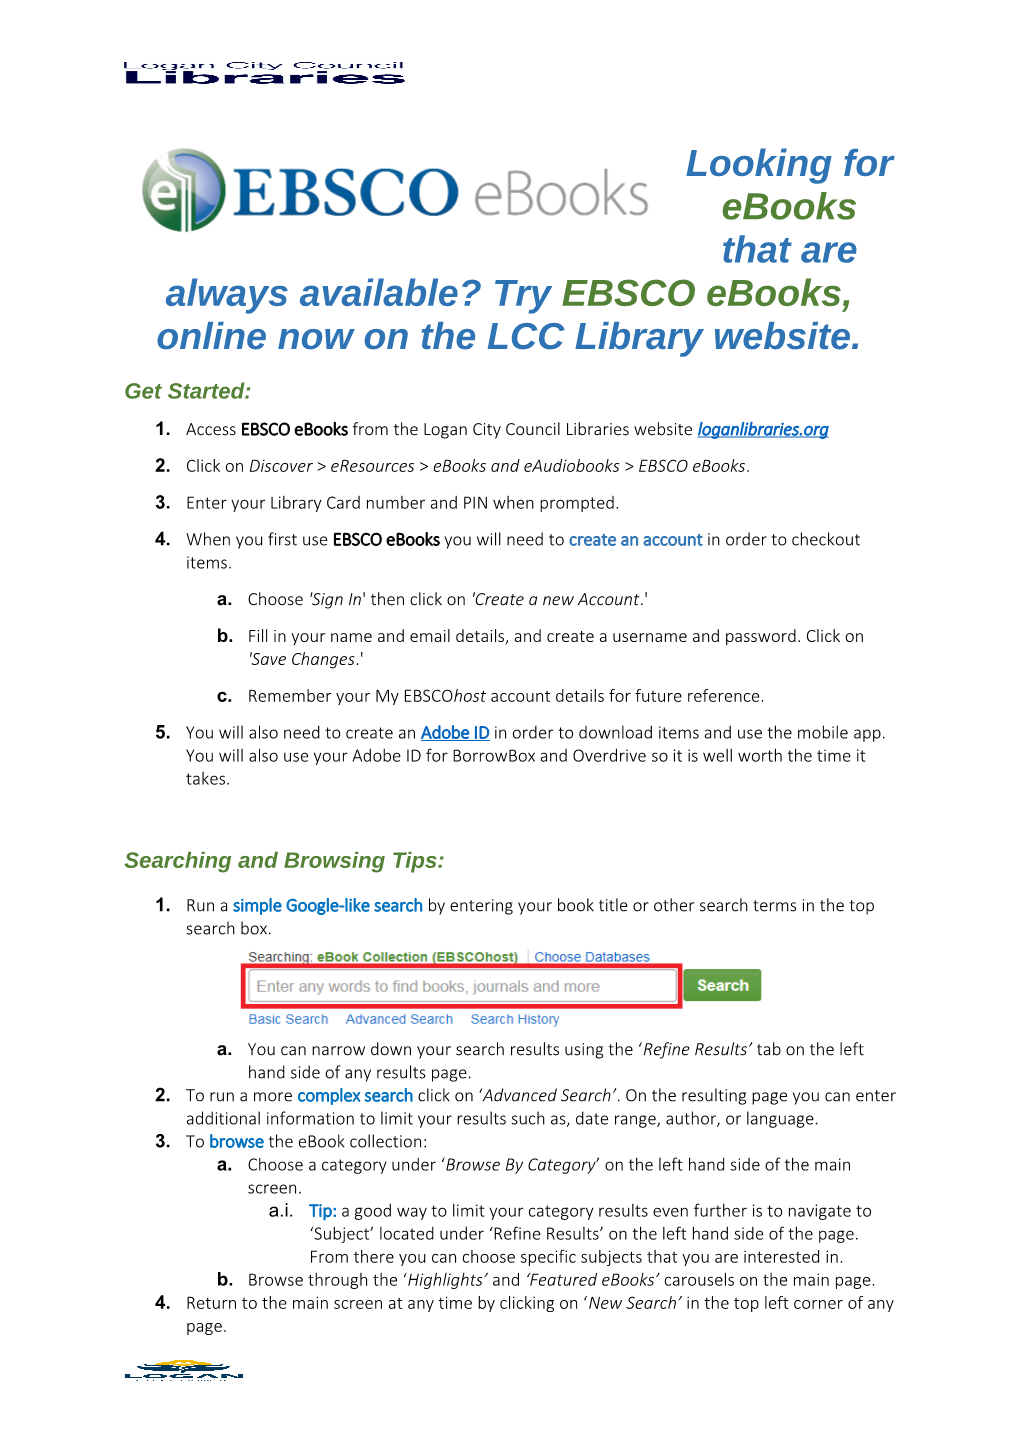 Looking for Ebooksthat Are Always Available? Try EBSCO Ebooks, Online Now on the LCC Library